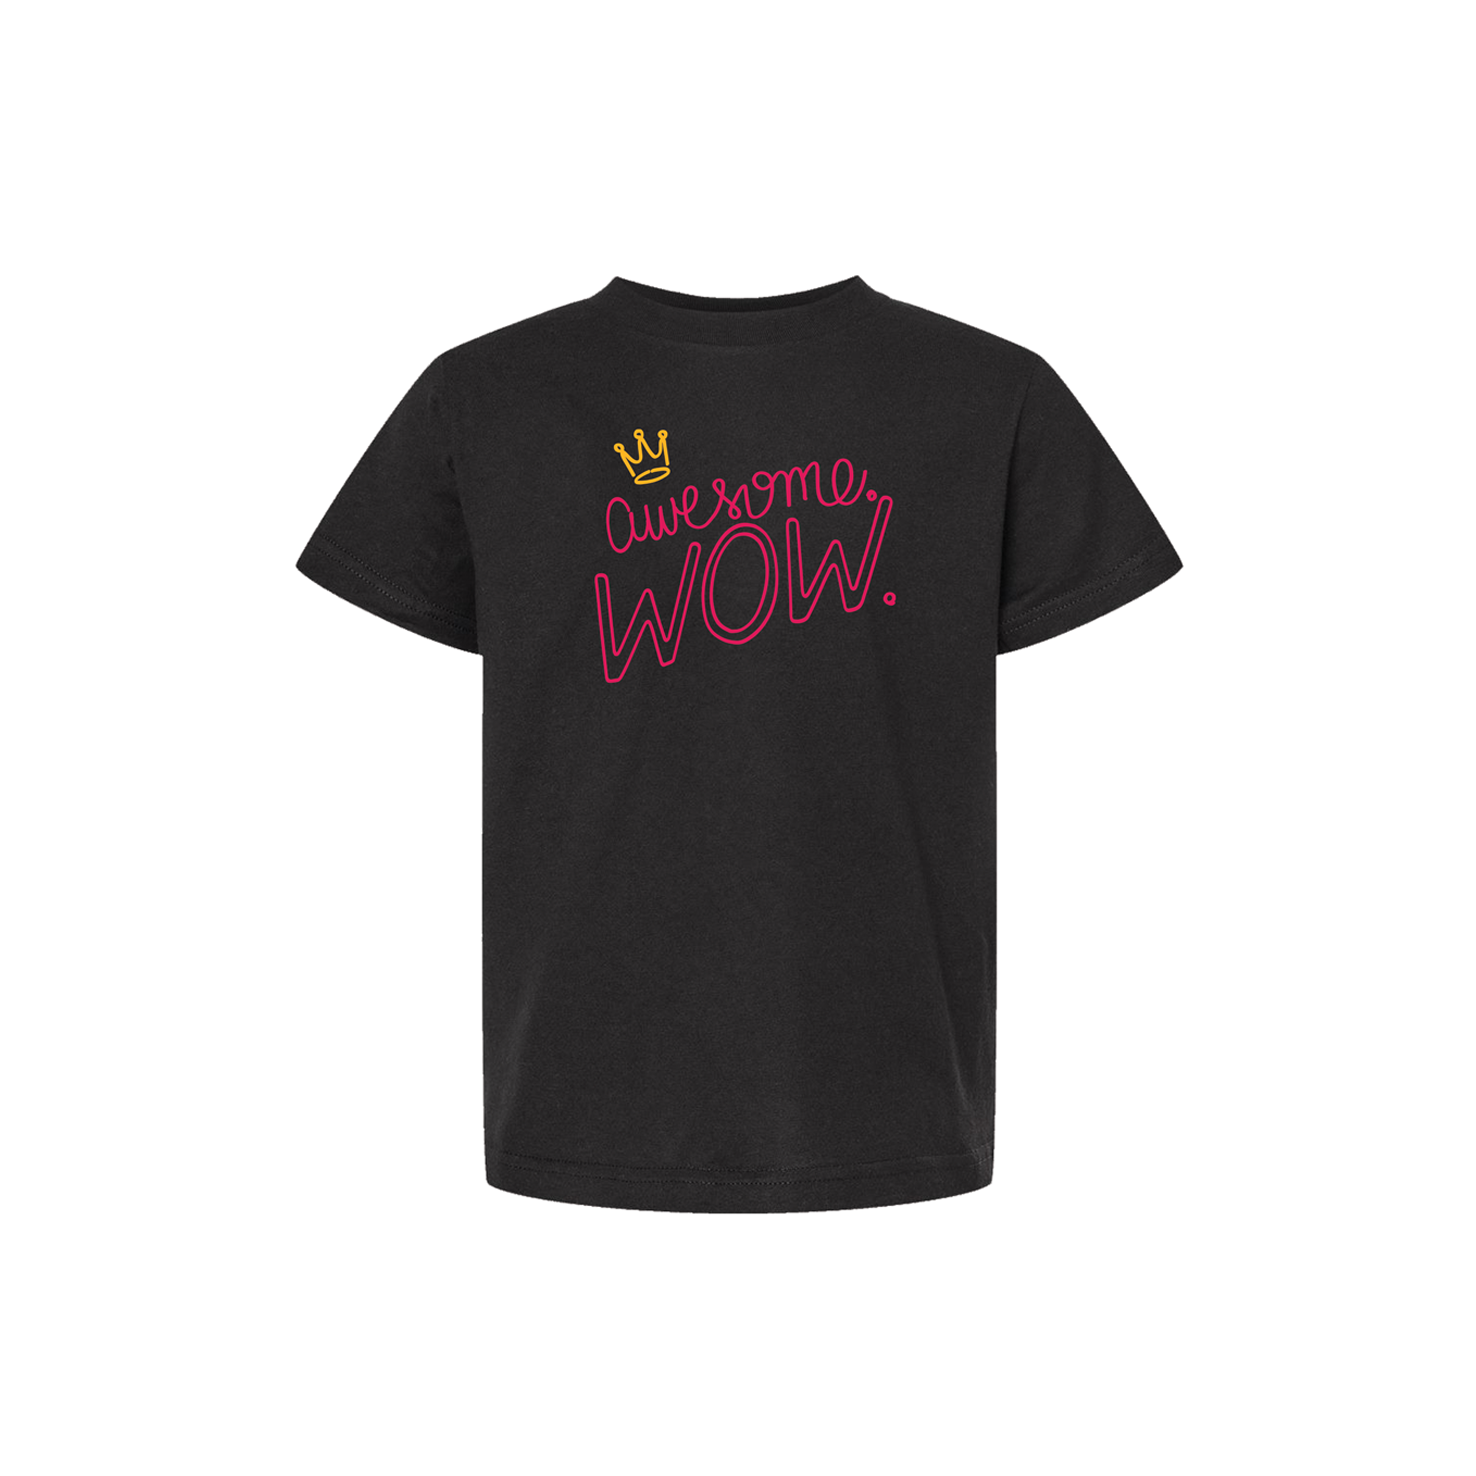 HAMILTON Awesome Wow Youth Tee - Image 2